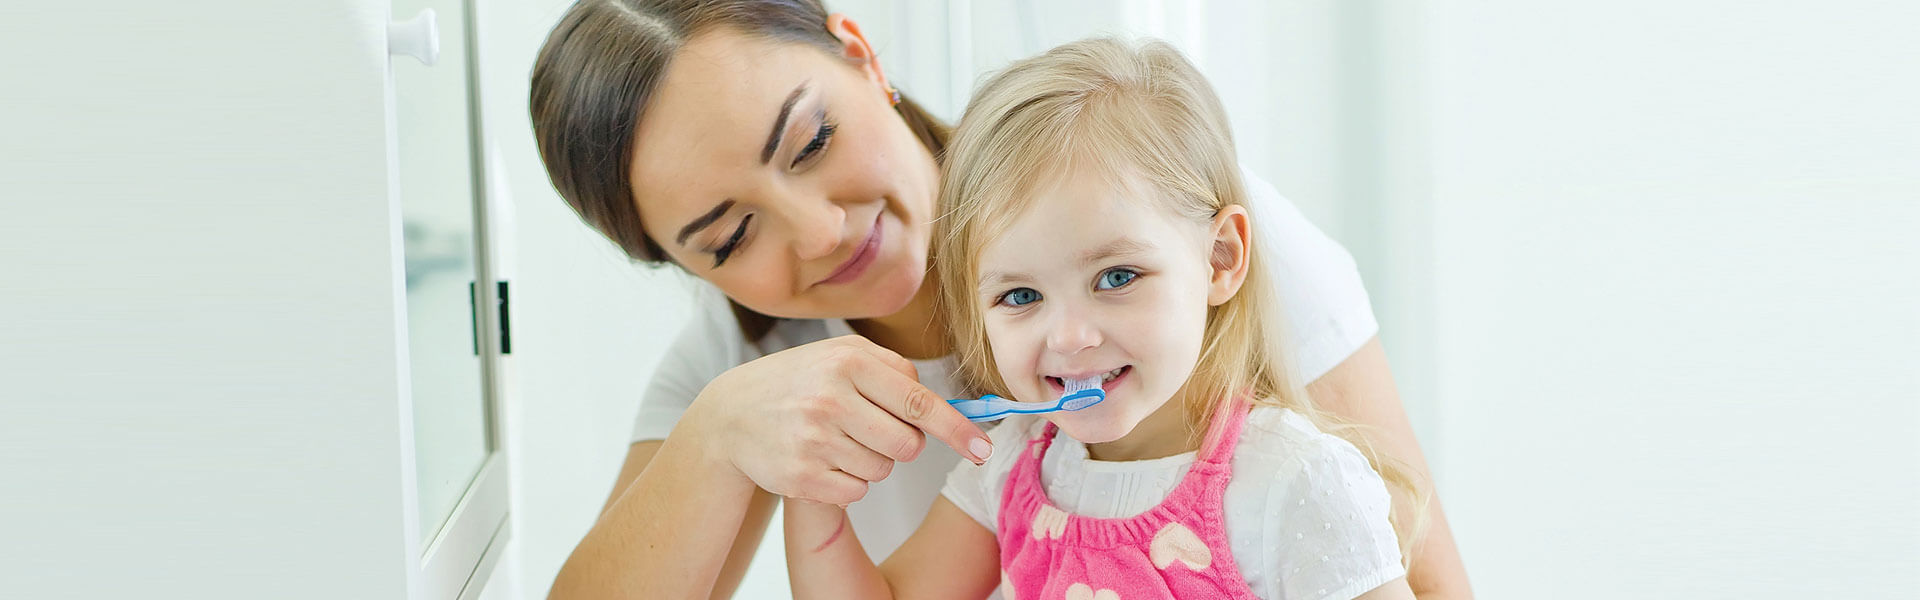 Tips By Pediatric Dentistry For Kids to Brush Correctly